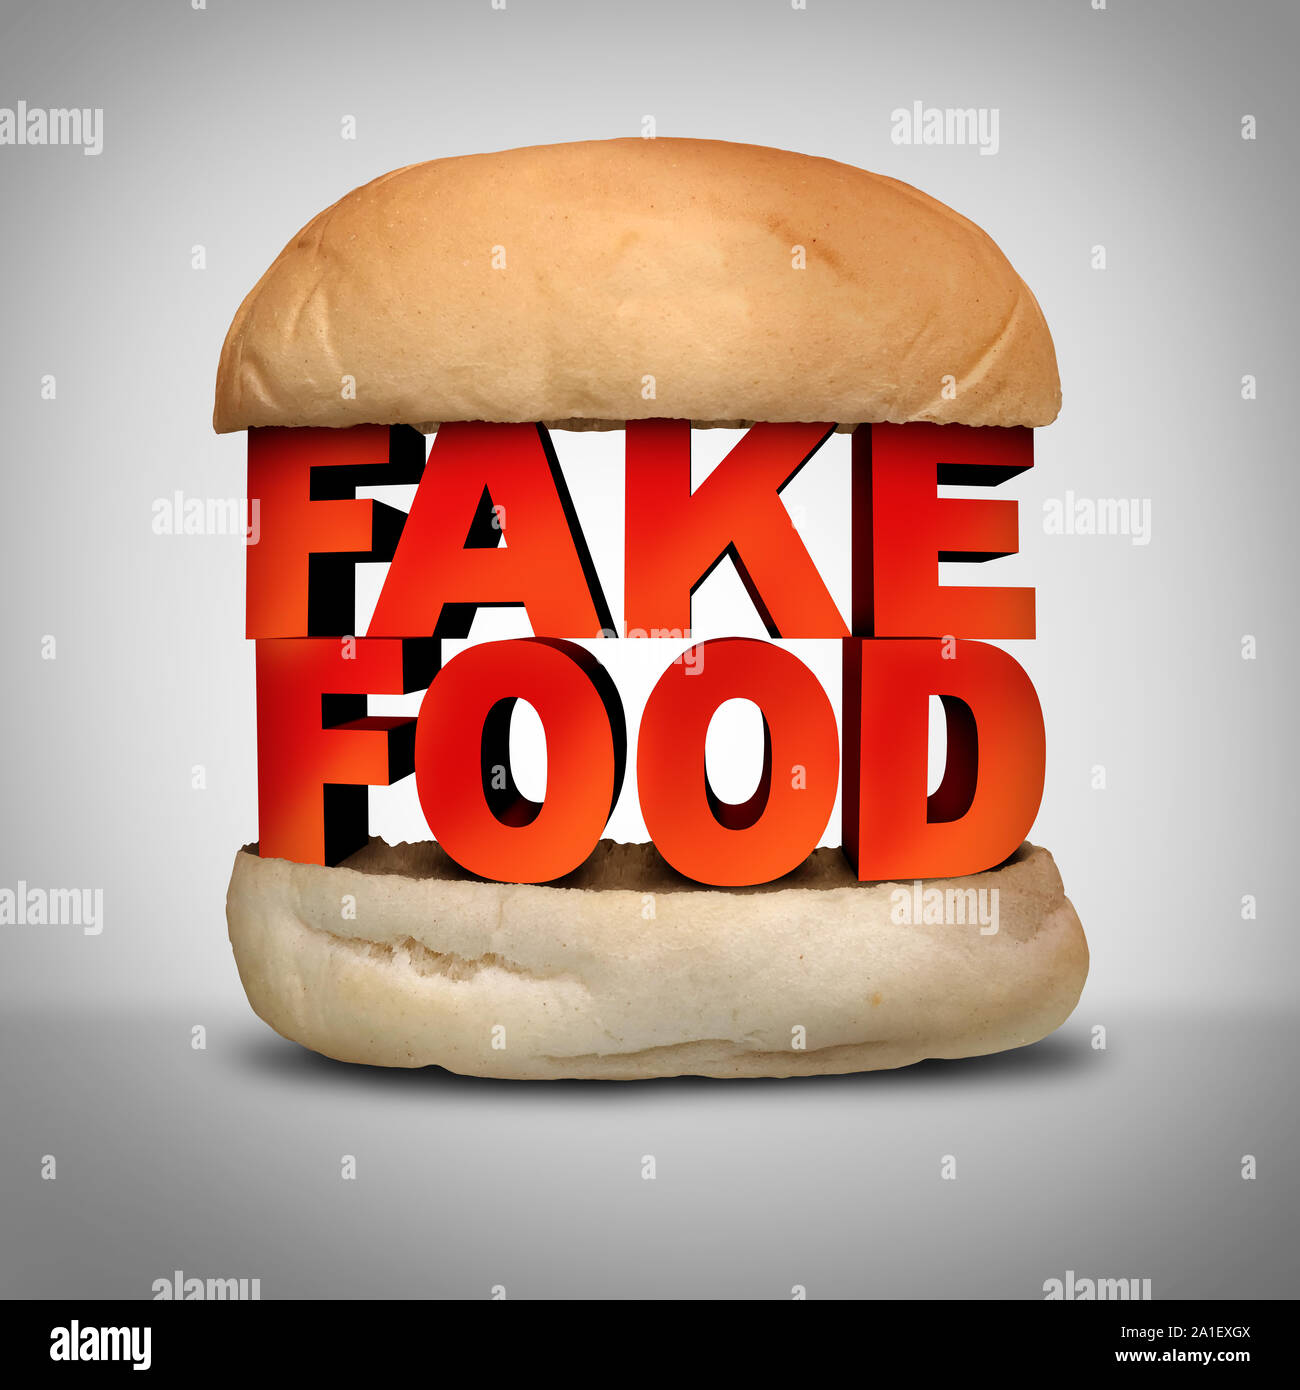 Fake food concept and counterfeit meal as a burger bun with fraudulent ingredients misrepresenting a product at the market. Stock Photo